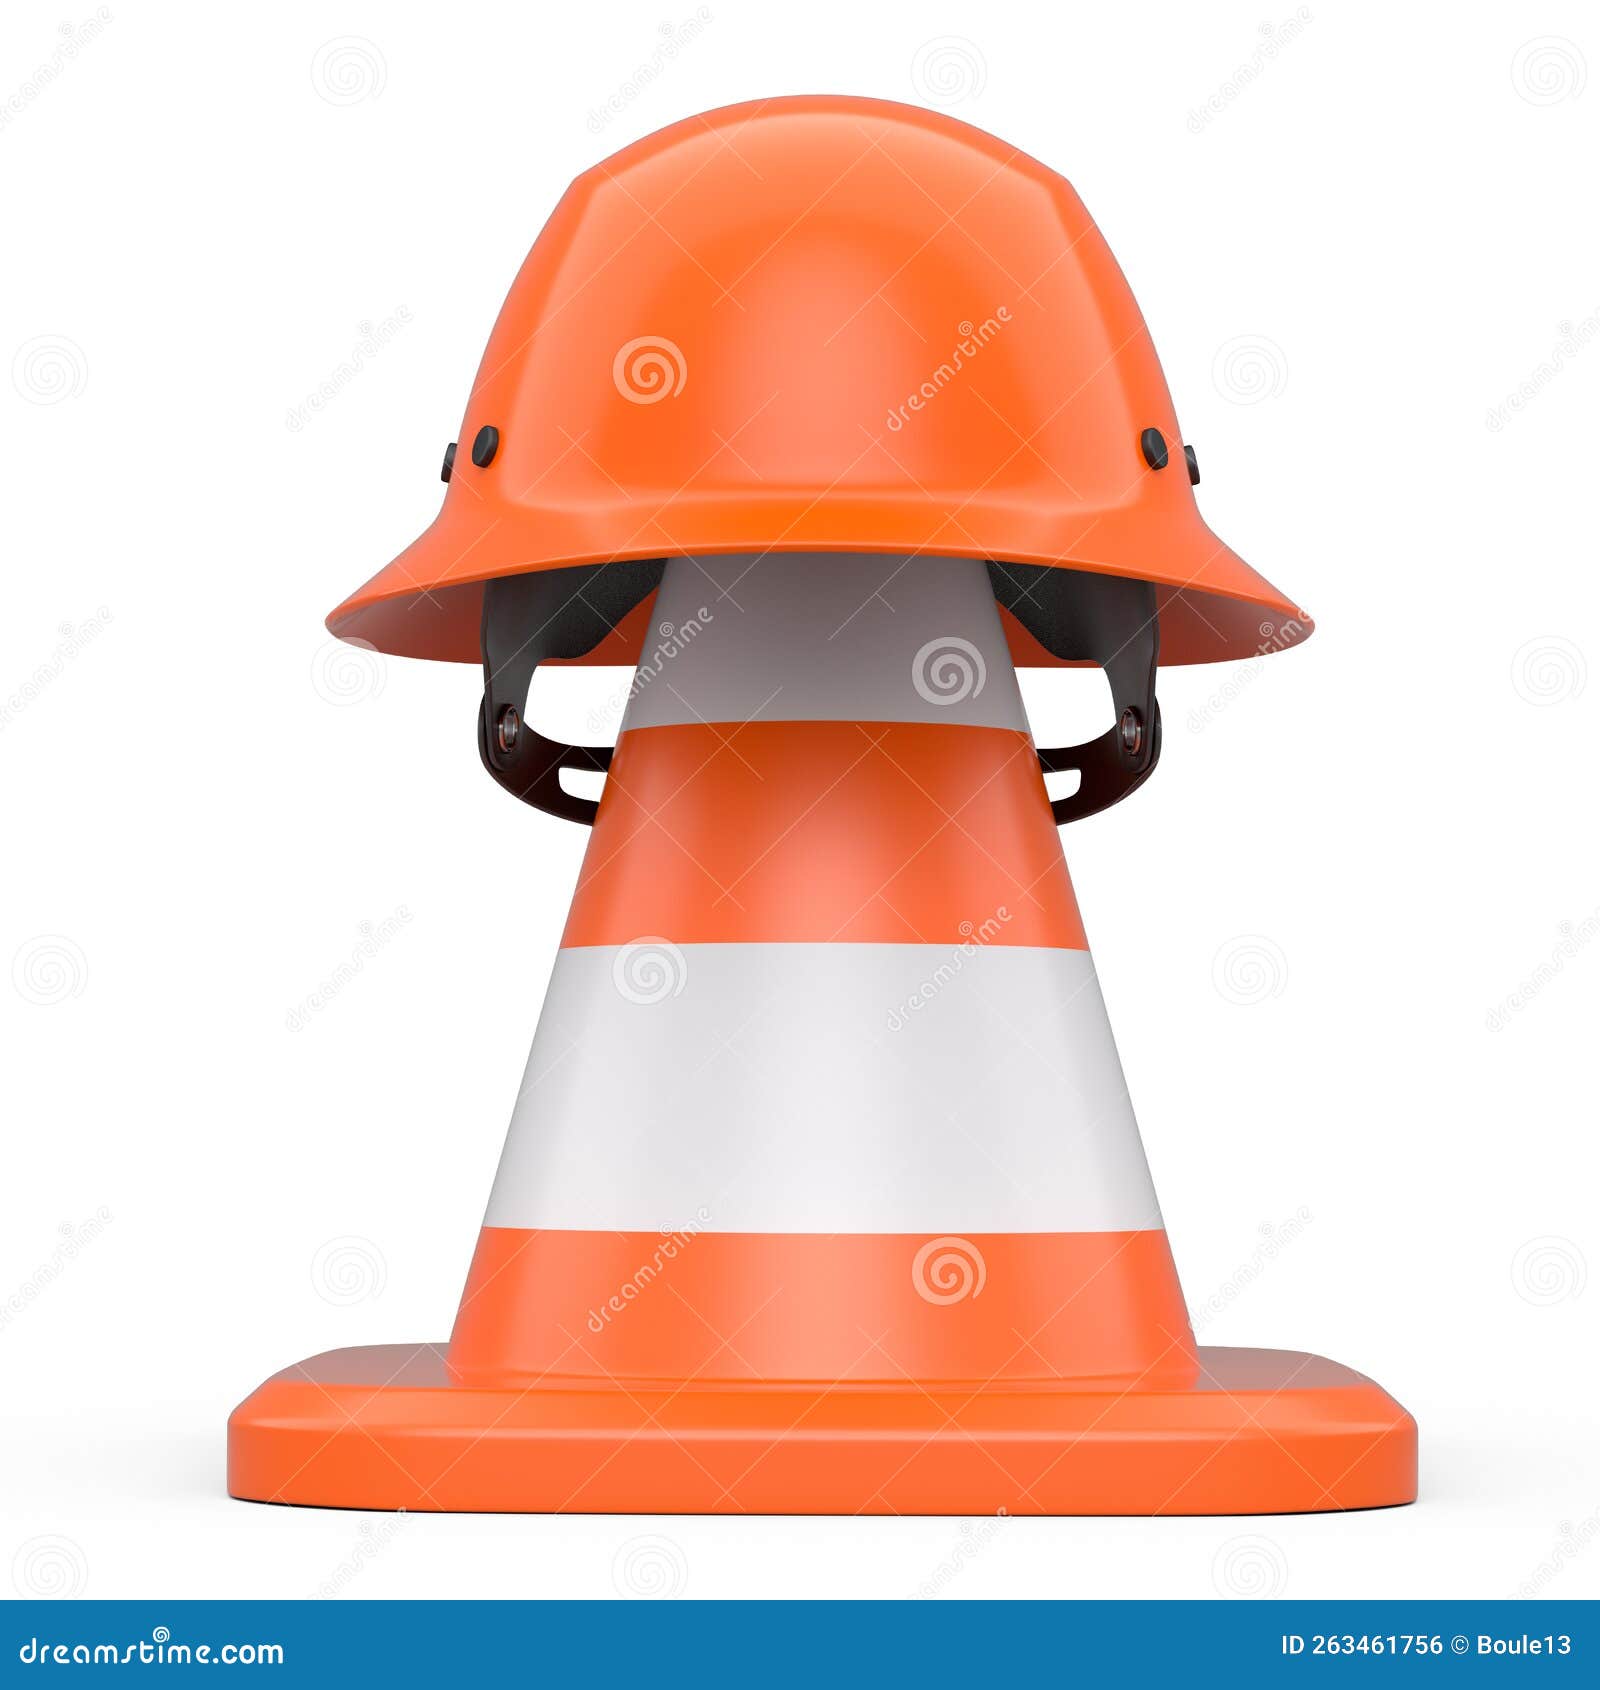 Stack of Safety Helmets or Hard Hats and Traffic Cones on White Background  Stock Illustration - Illustration of engineer, equipment: 263461756